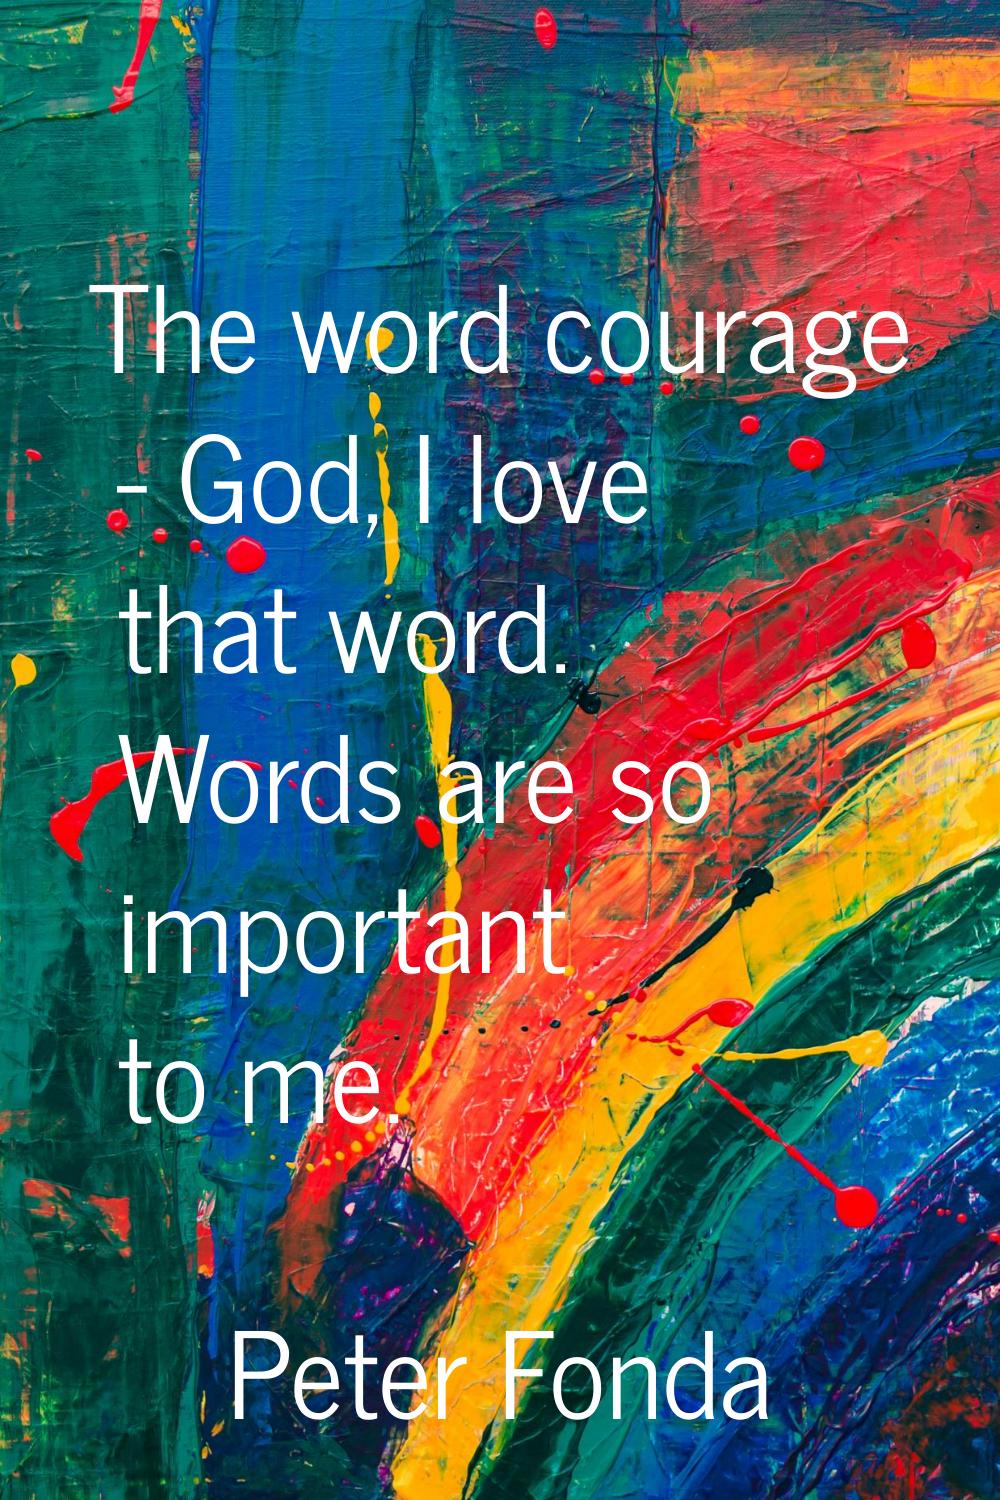 The word courage - God, I love that word. Words are so important to me.